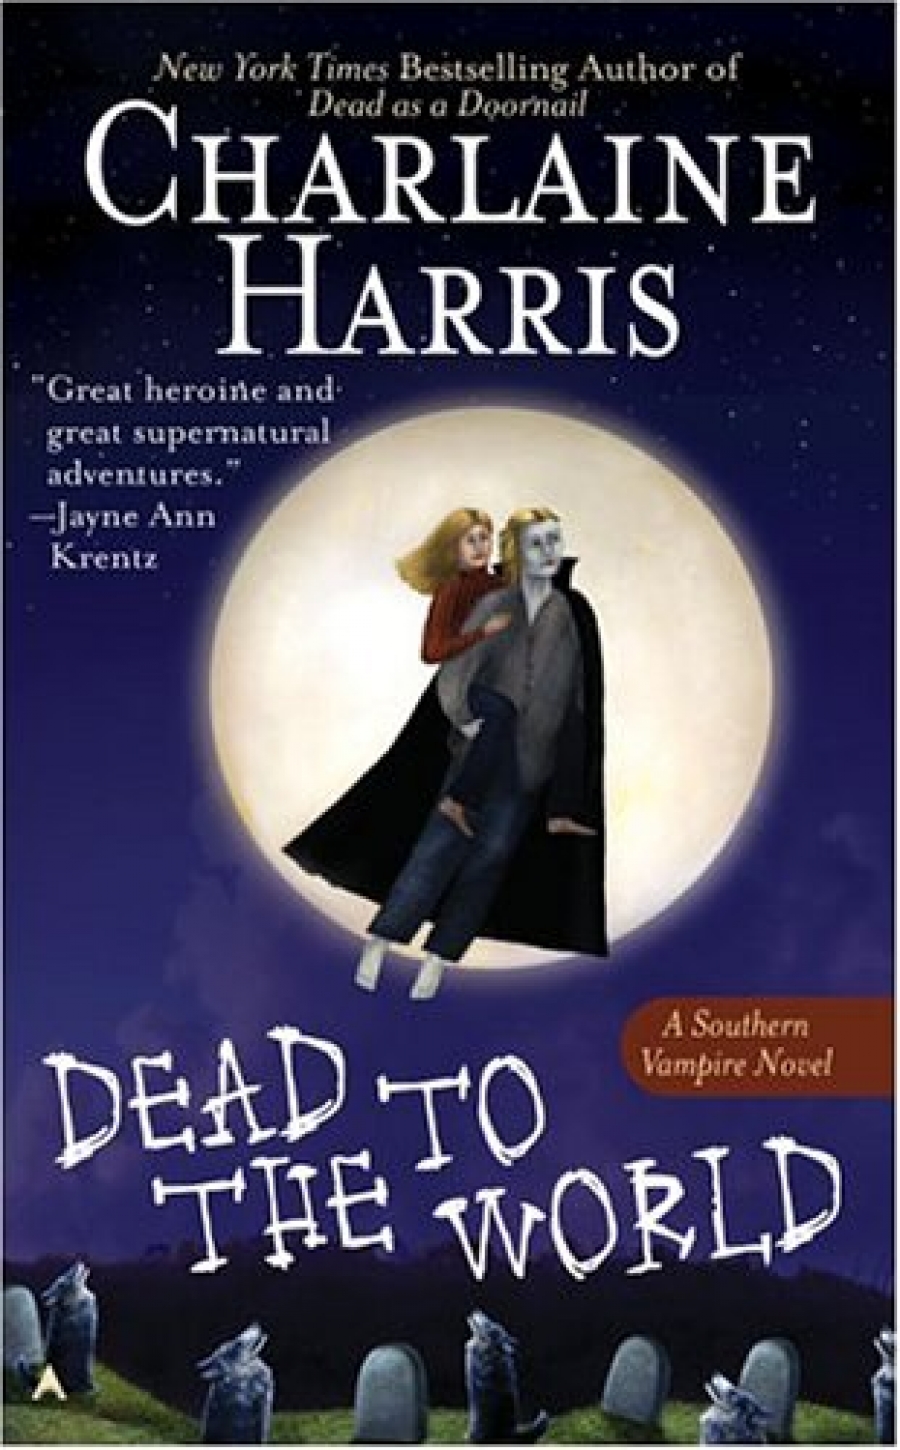 Charlaine H. Dead to World (Southern Vampire Mysteries vol.4) 